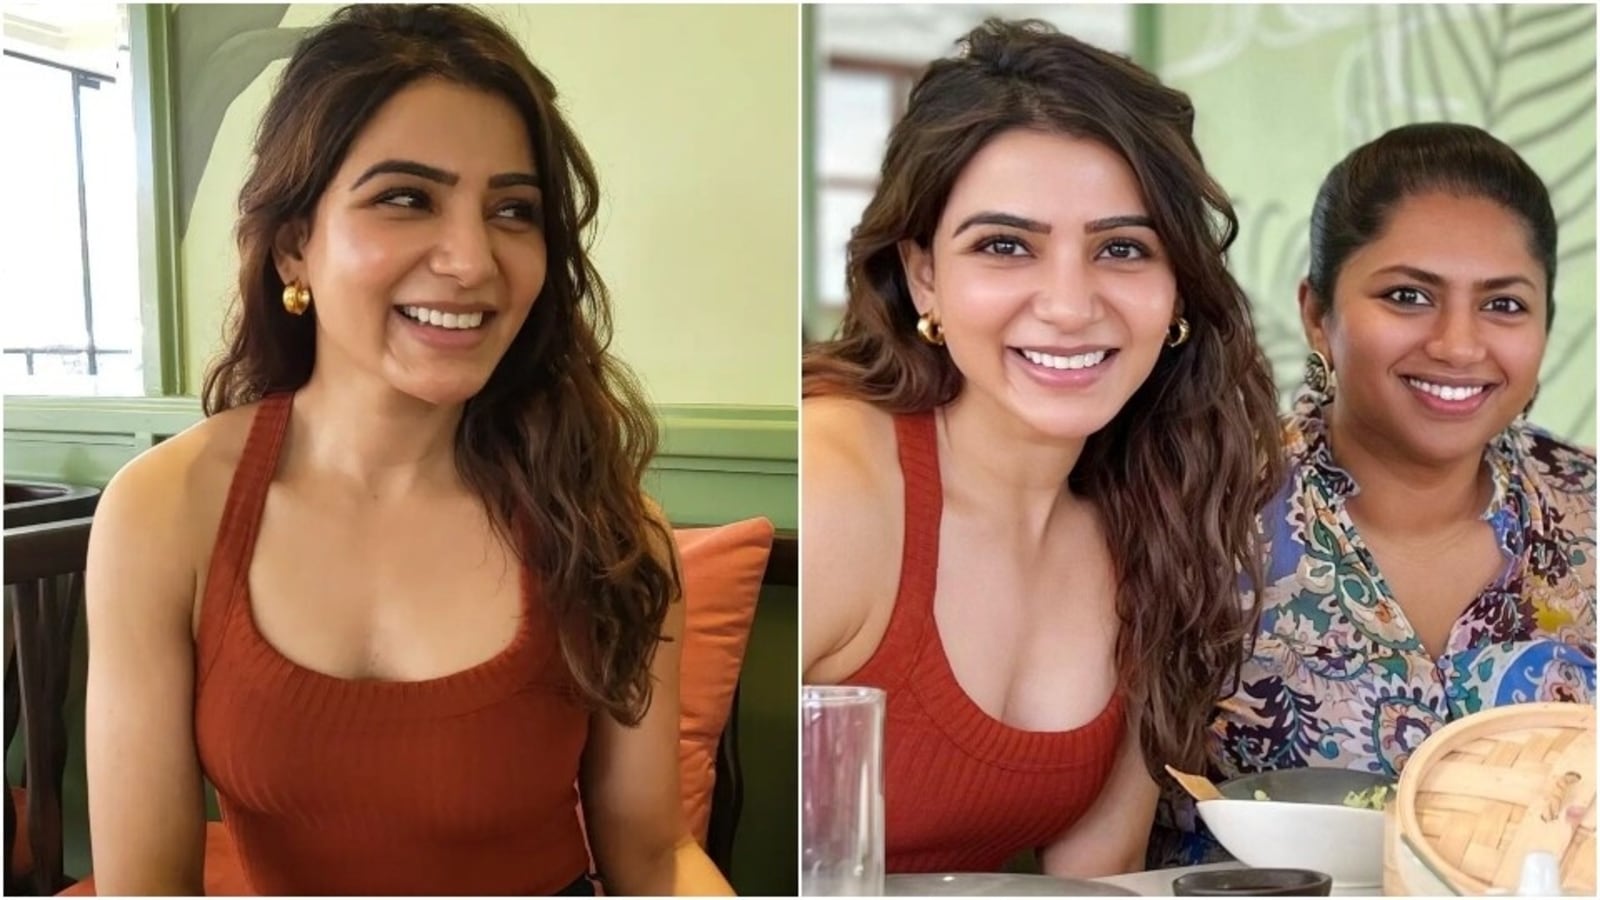 Tamil Actress Samantha Sex Photos - Samantha Ruth Prabhu enjoys girls' day-out in chic bodysuit and trendy  denims | Fashion Trends - Hindustan Times